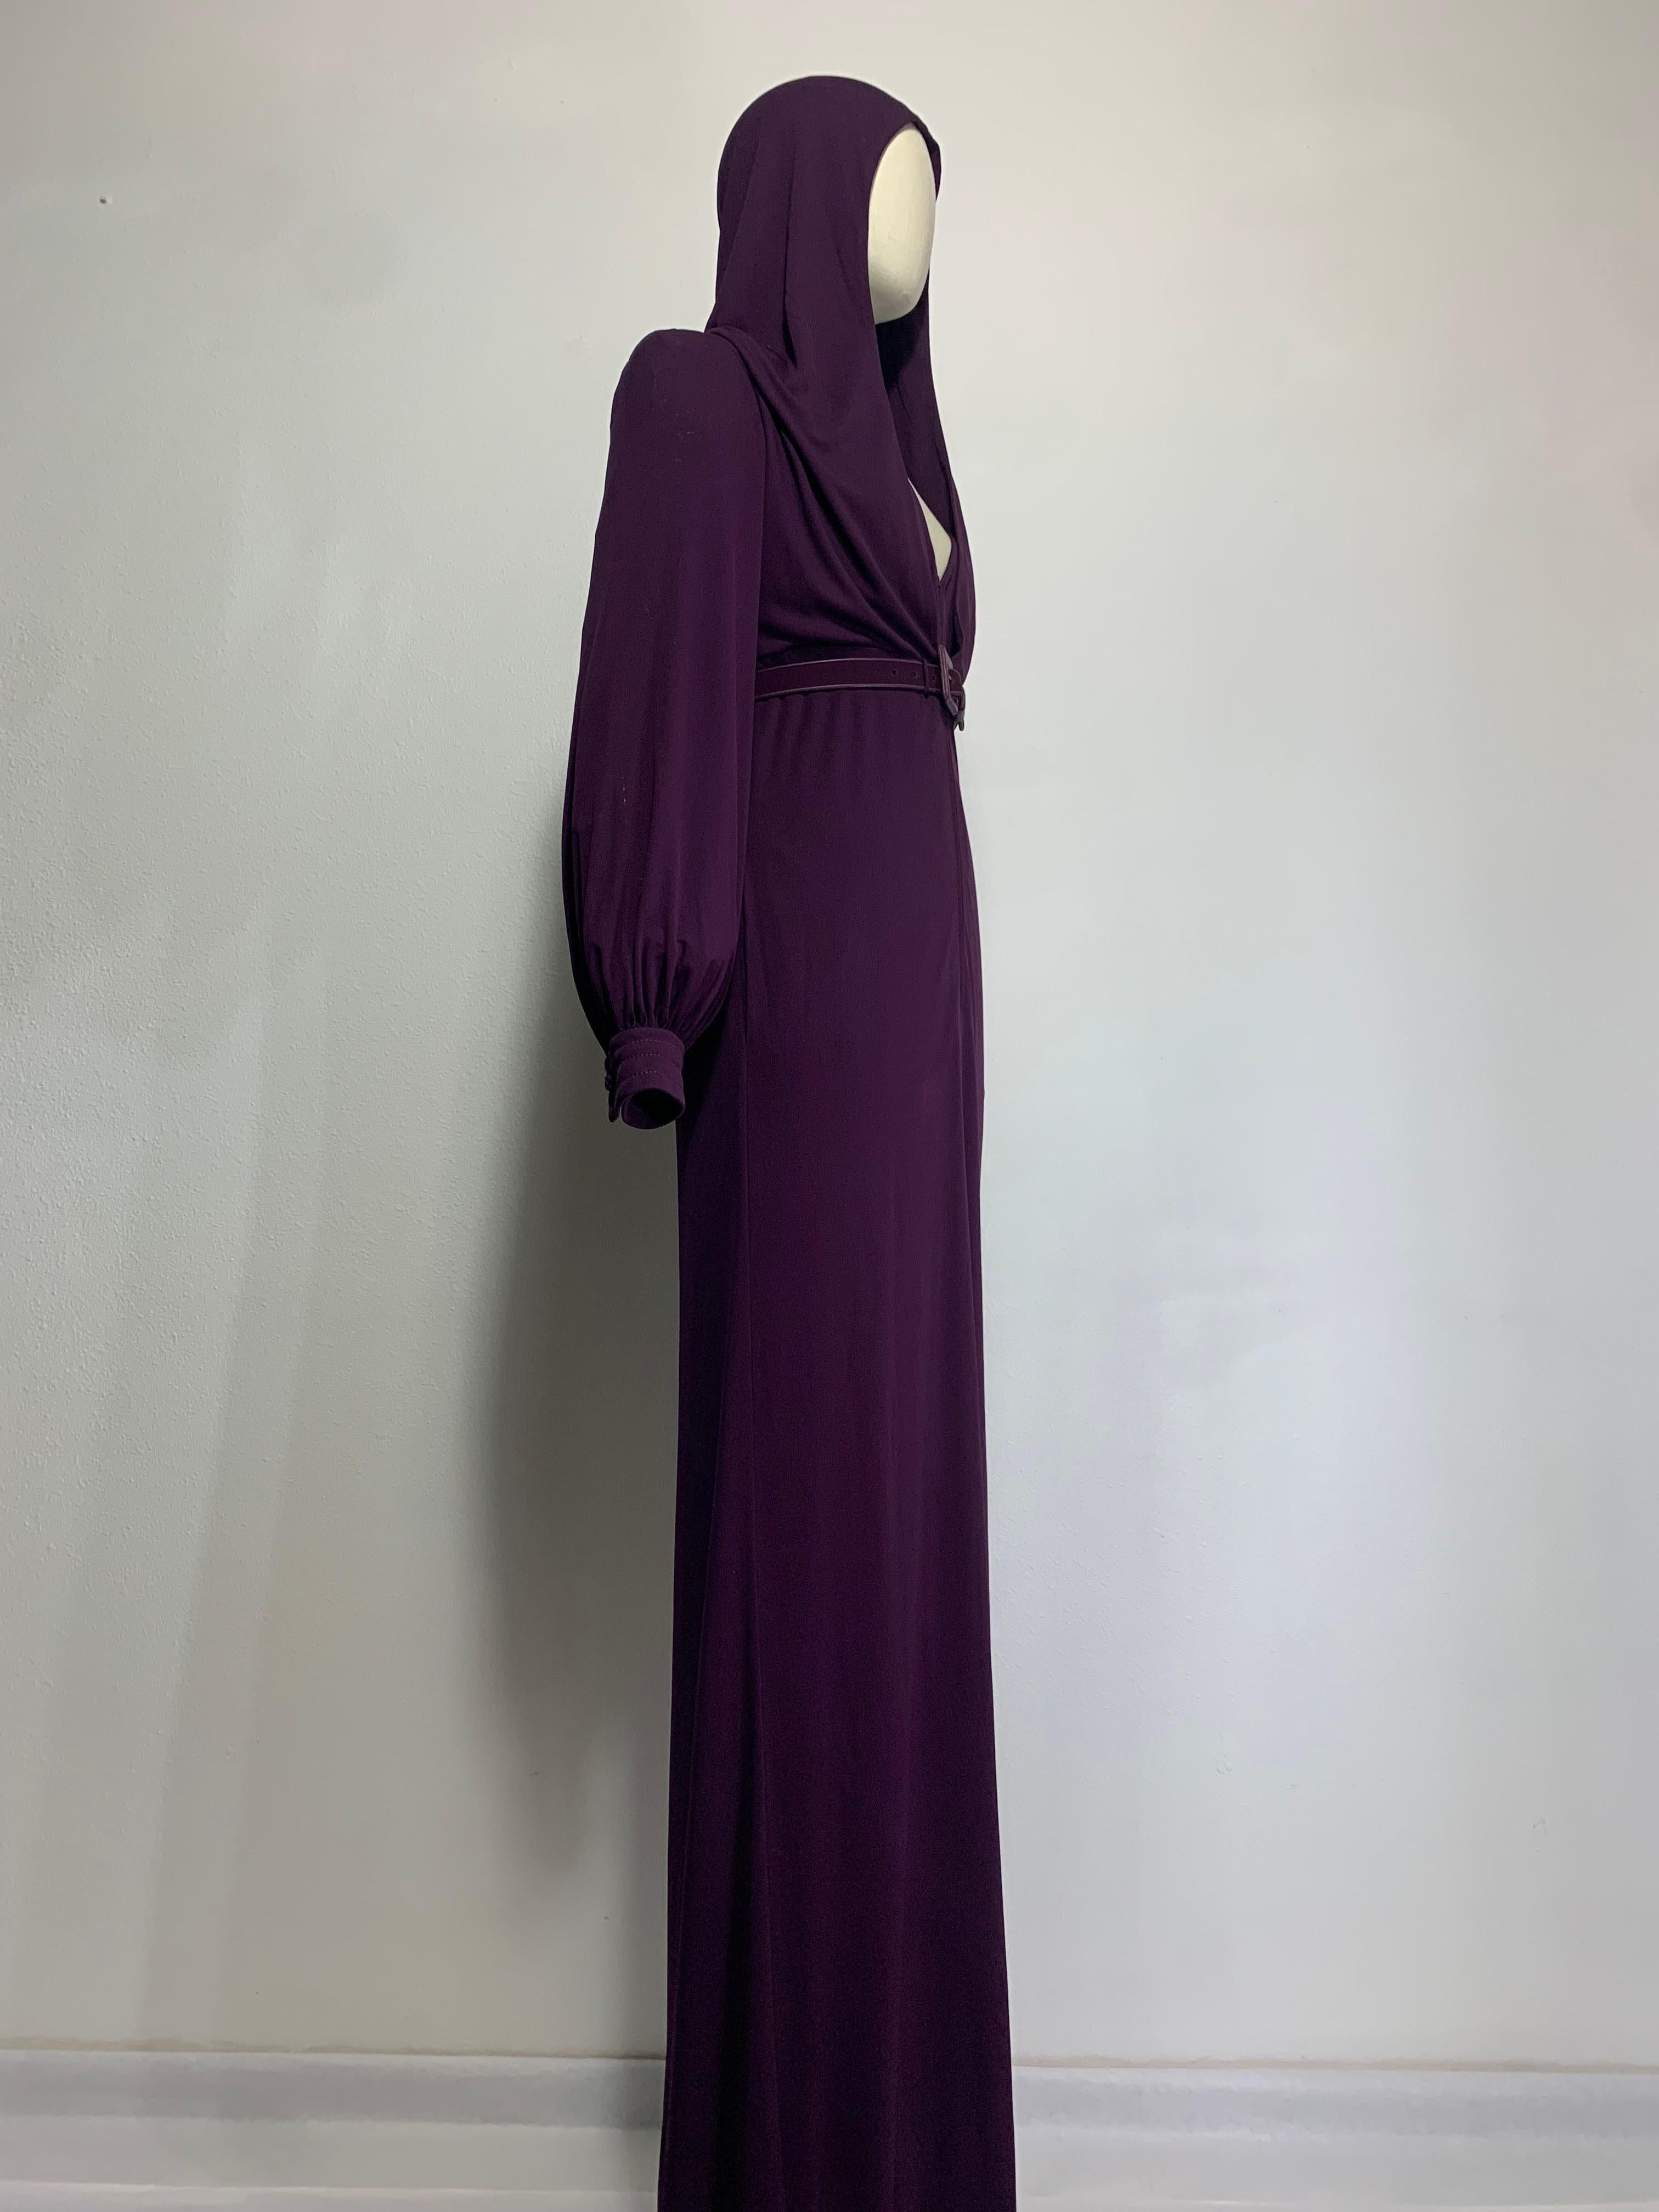 1975 James Galanos Dramatic Aubergine Jersey Maxi Gown w Fabulous Draped Hood For Sale 4